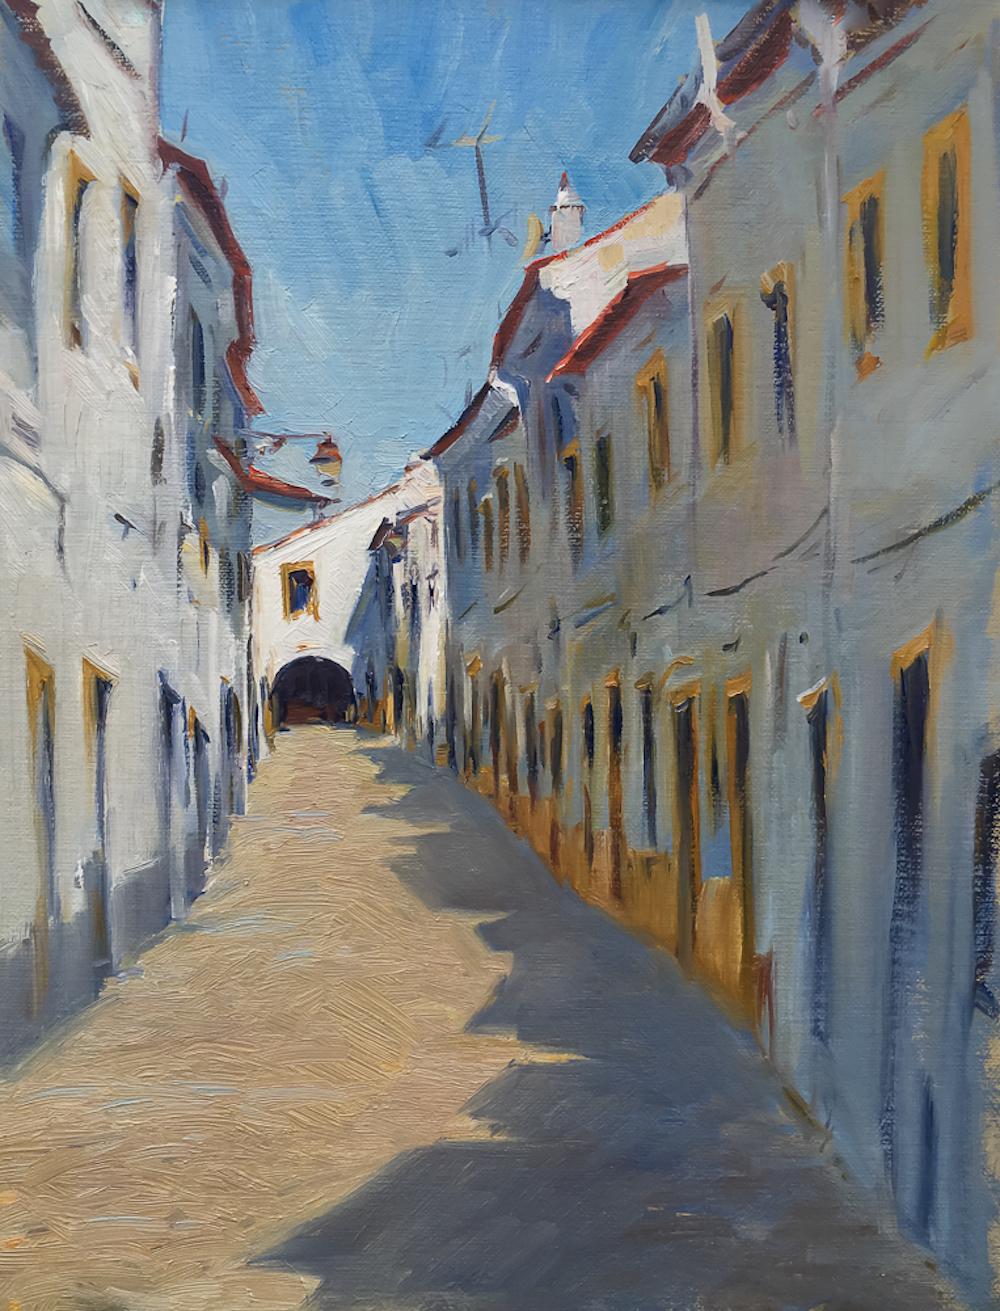 Street in Evora - Painting by Tina Orsolic Dalessio